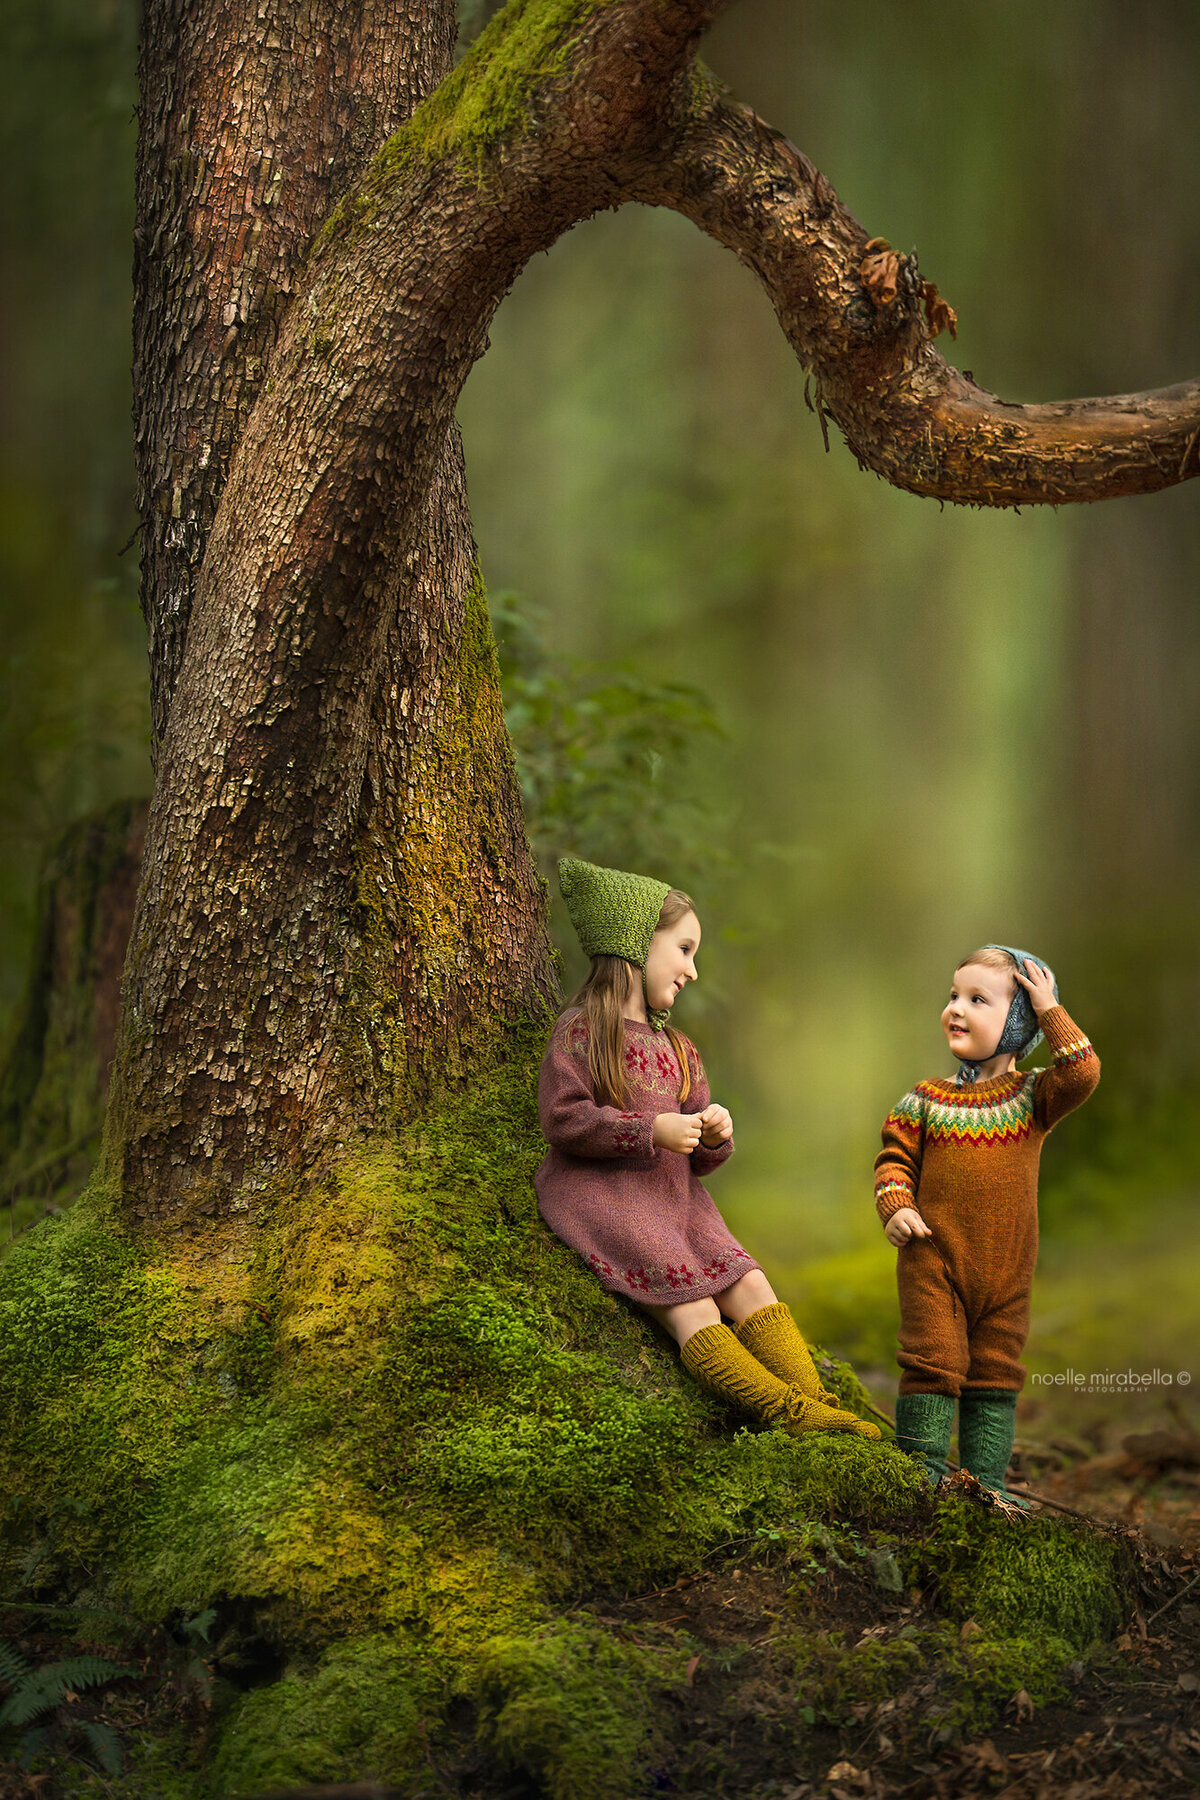 Children playing at the base of a large mossy tree in the forest, looking at each other laughing.